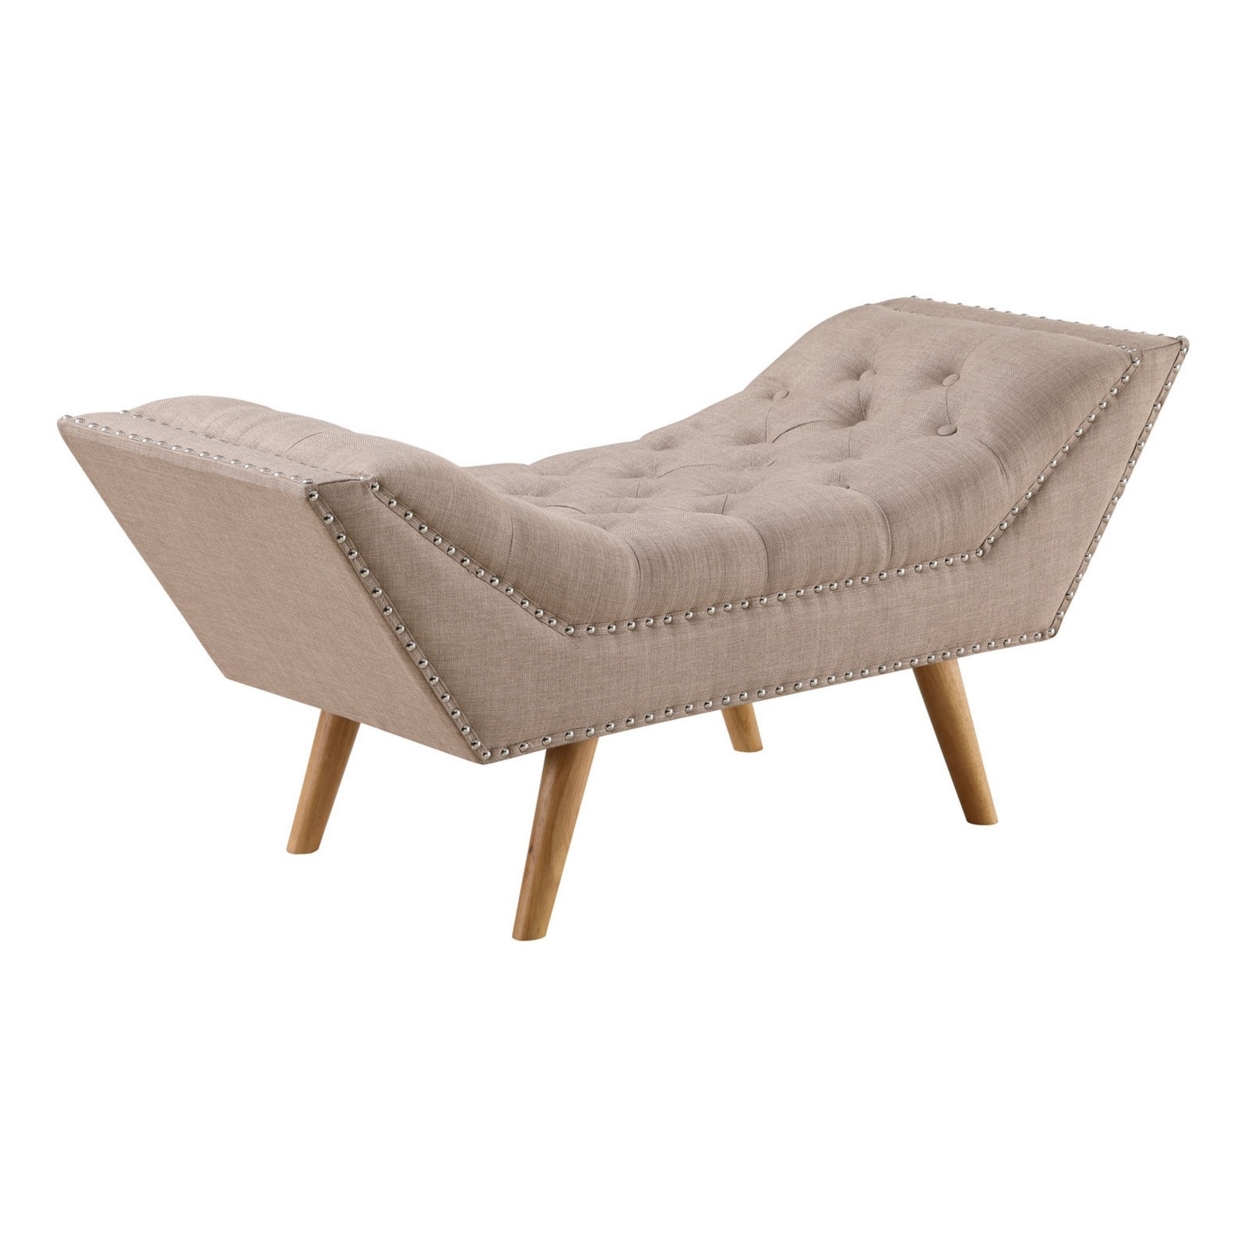 Bench With Button Tufted Details And Nailhead Trim, Beige- Saltoro Sherpi